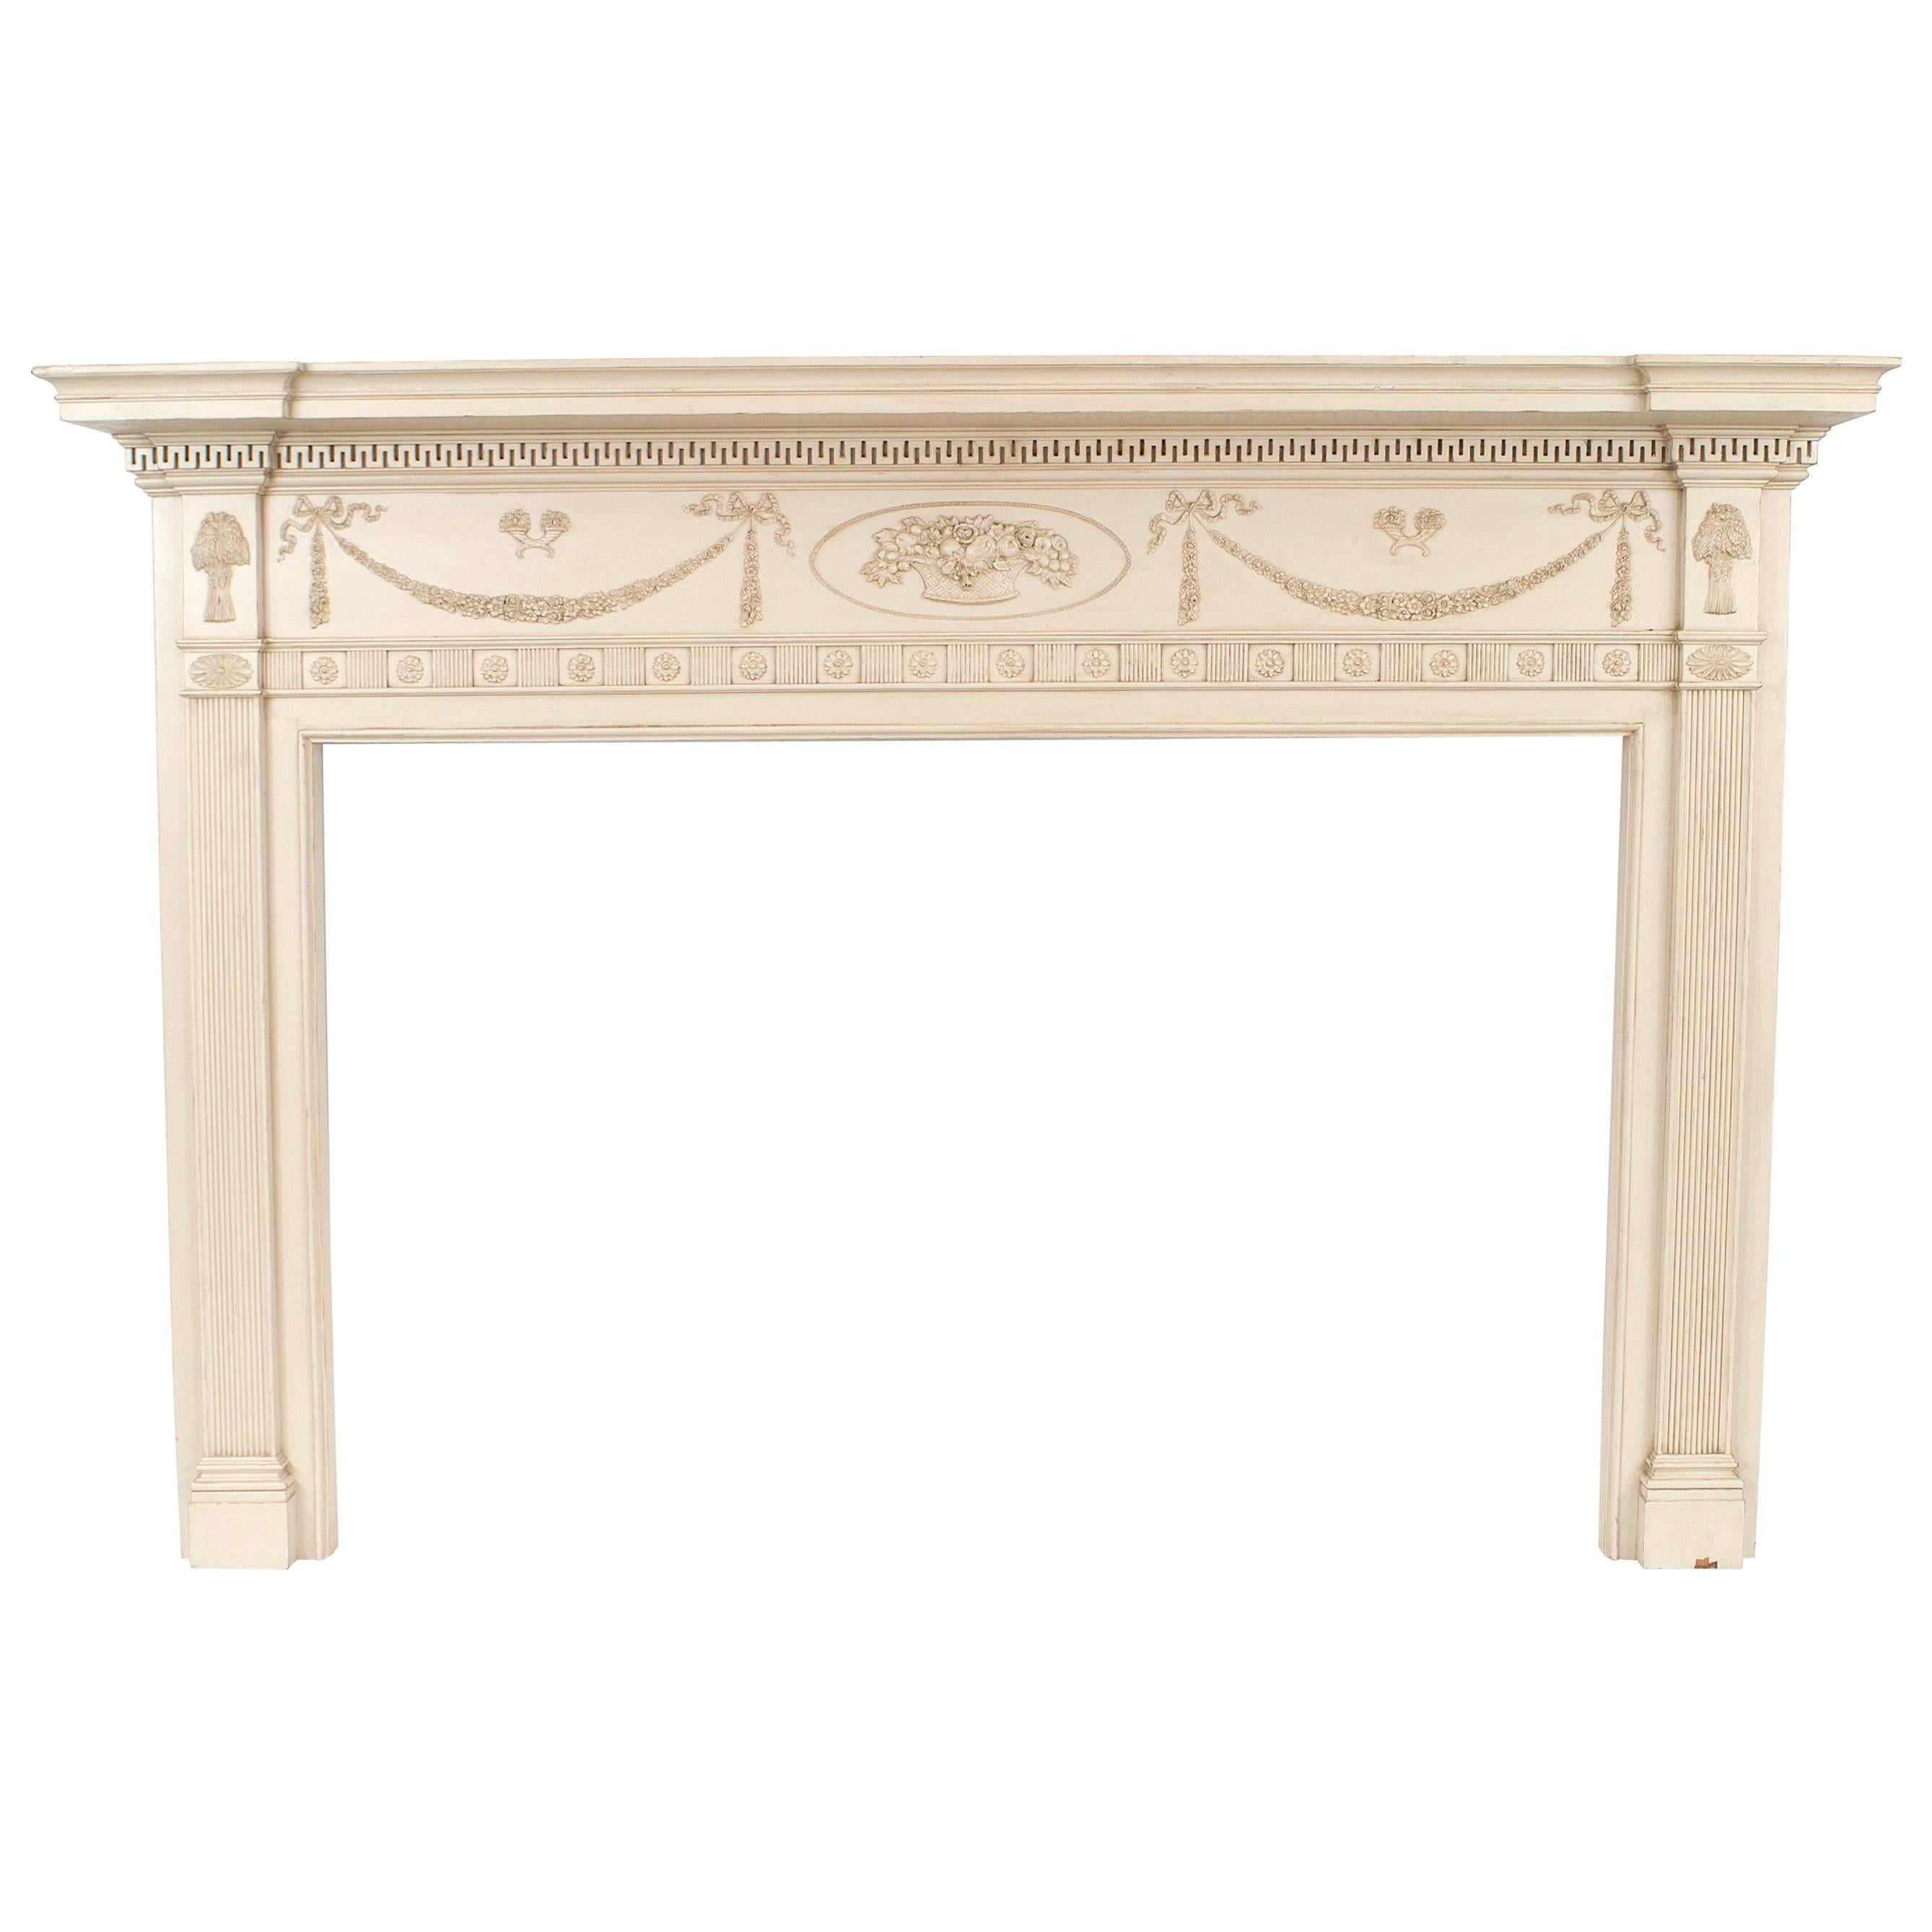 English Adam Painted Wood Mantel For Sale